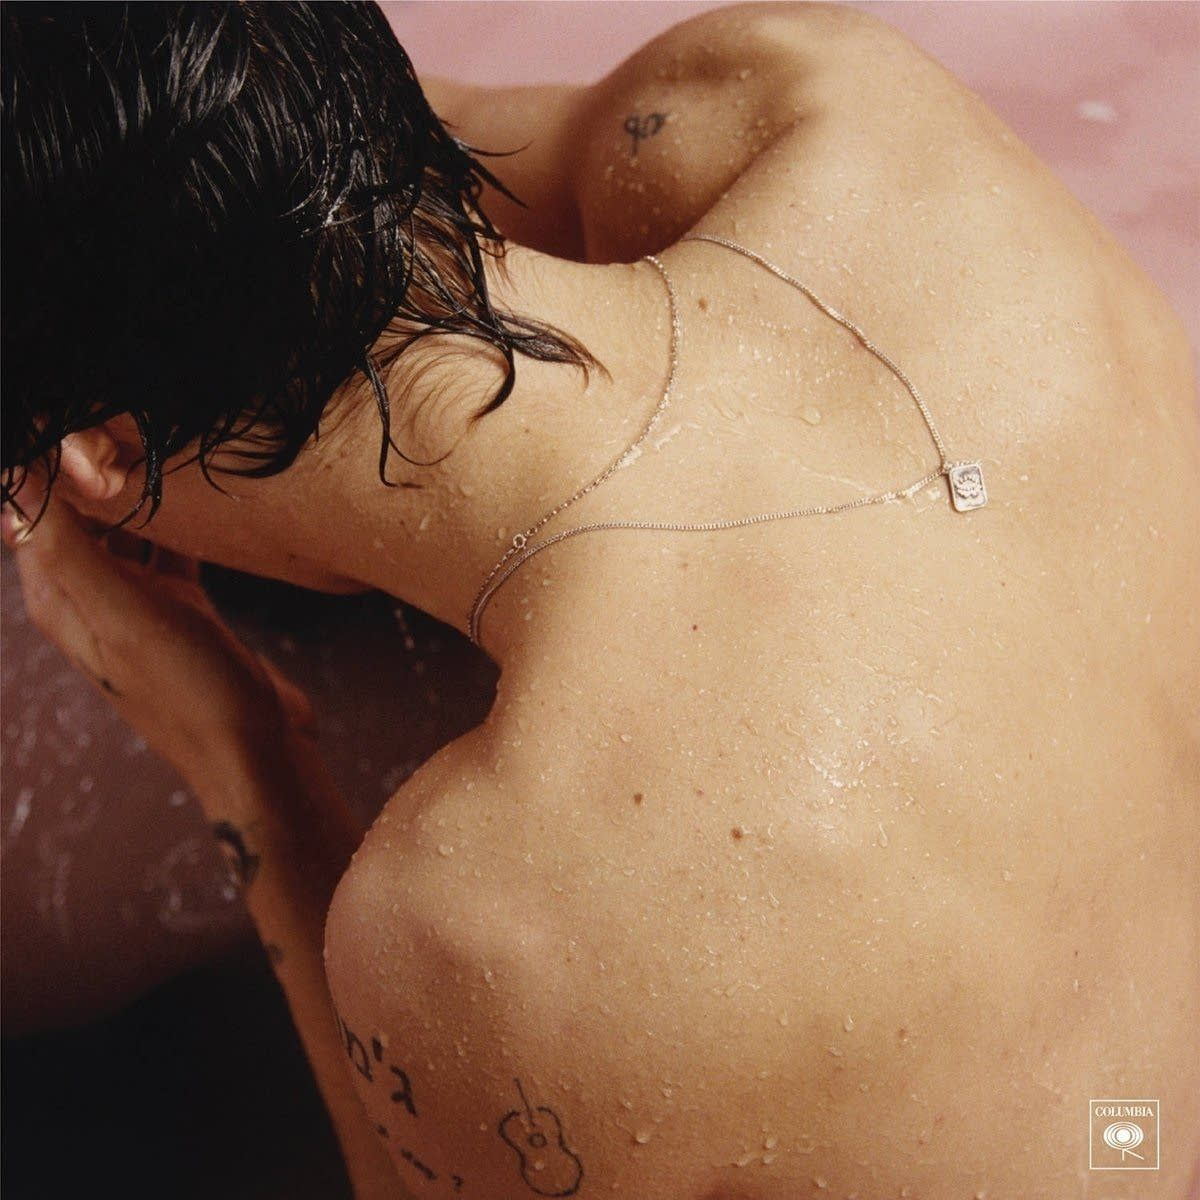 Harry Styles Tattoo Guide Harry Styles Tattoos Meanings Explained within dimensions 1200 X 1200